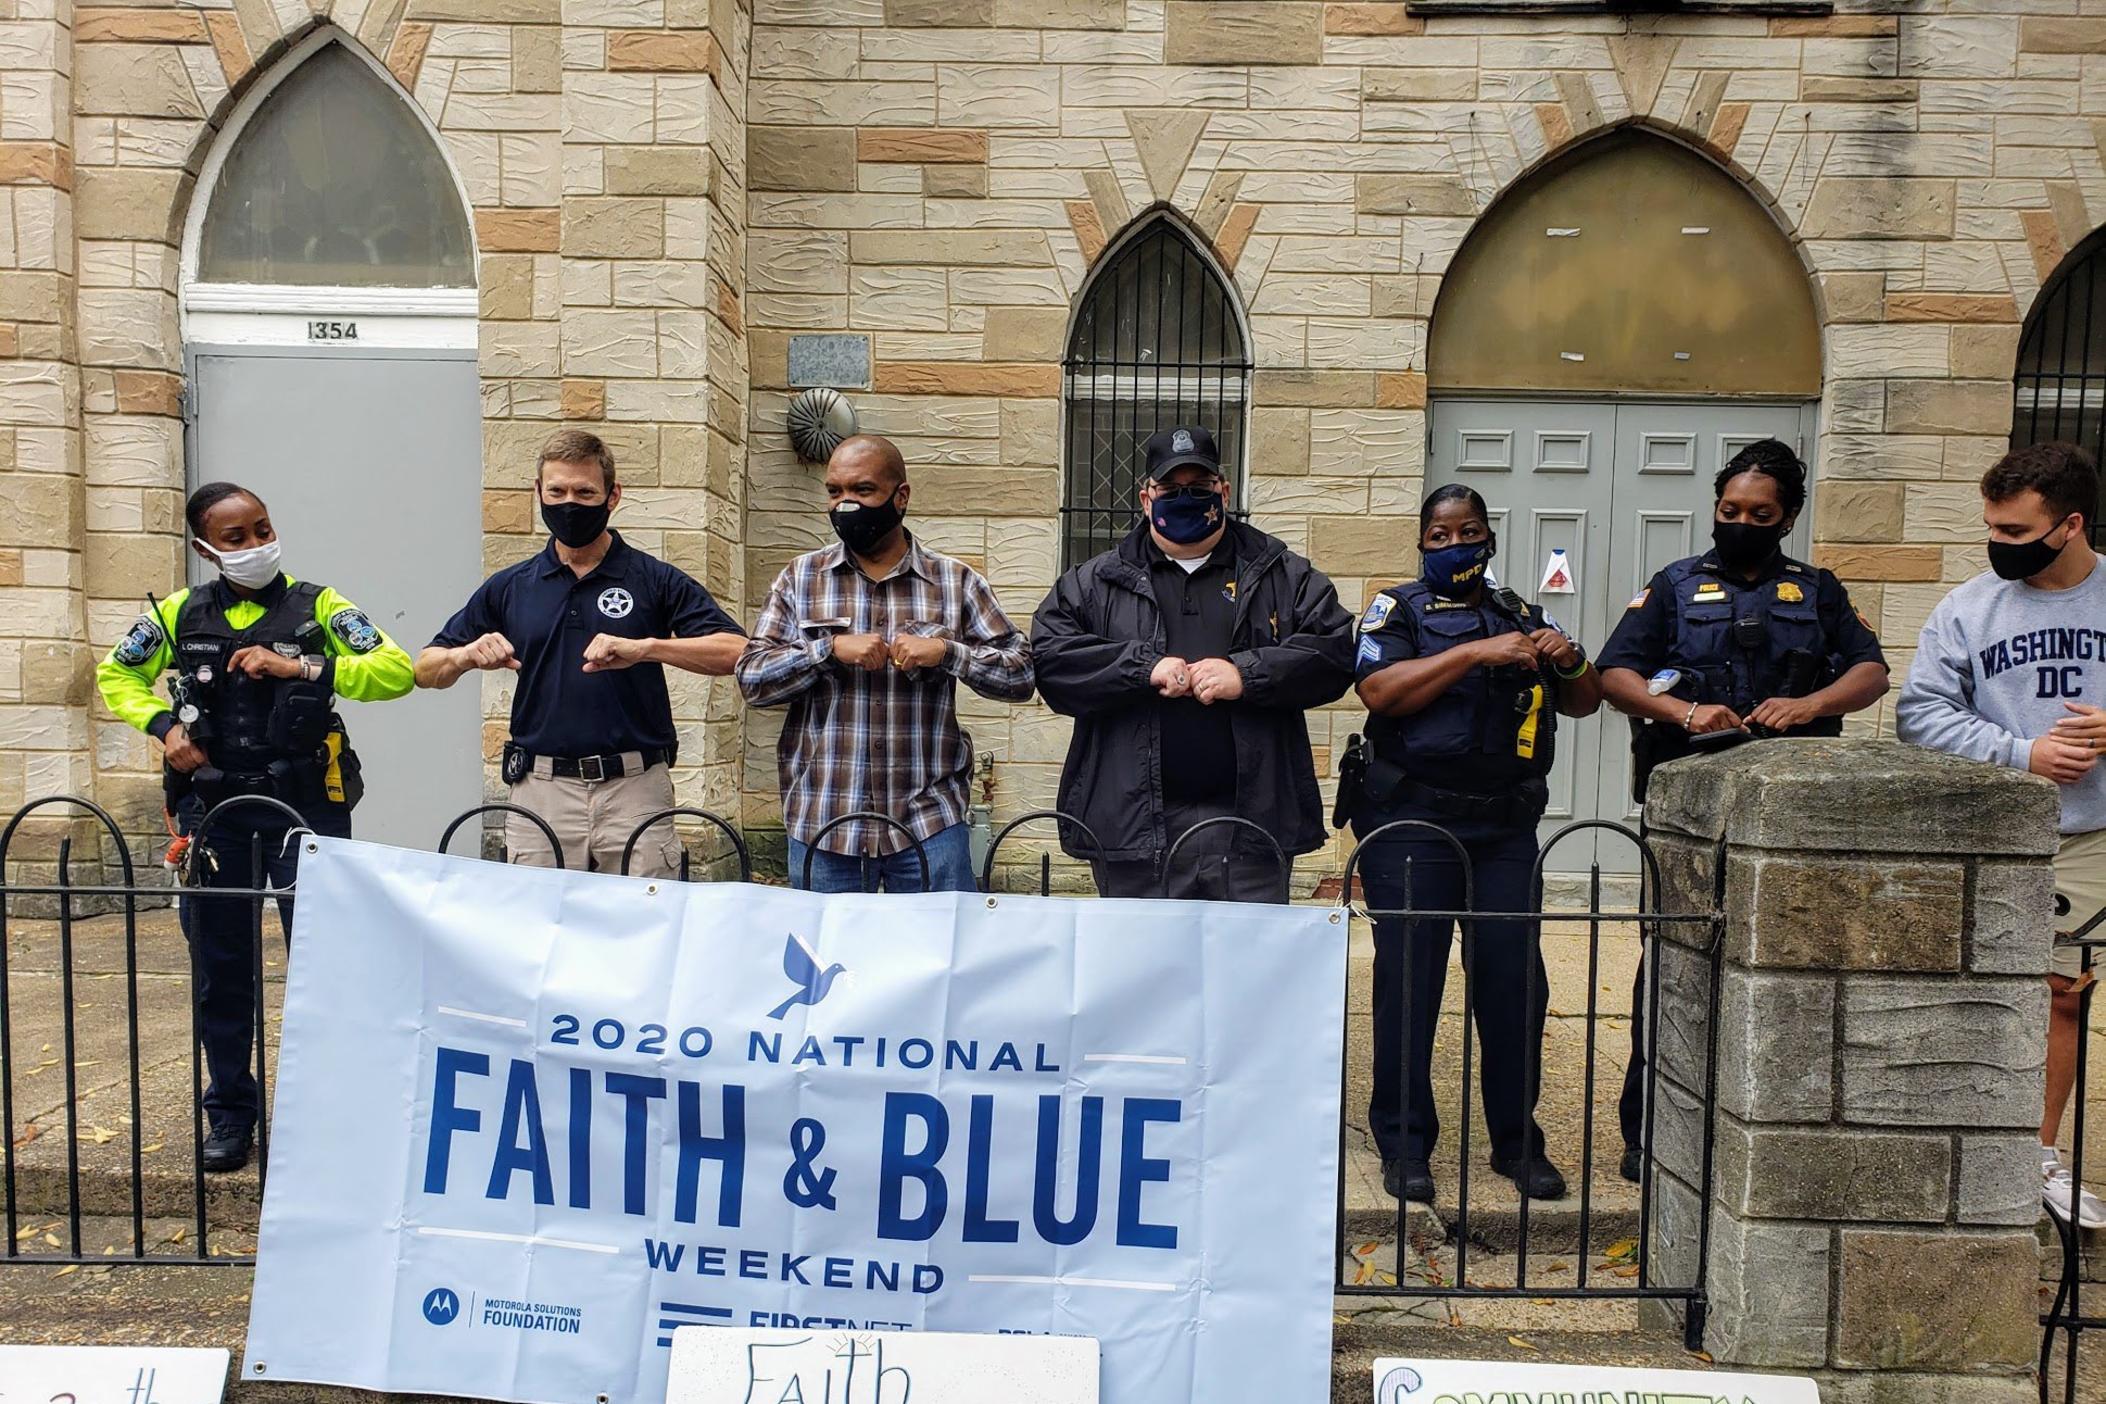 Law enforcement and community members touch elbows at a 2020 National Faith & Blue Weekend event in Washington, D.C.